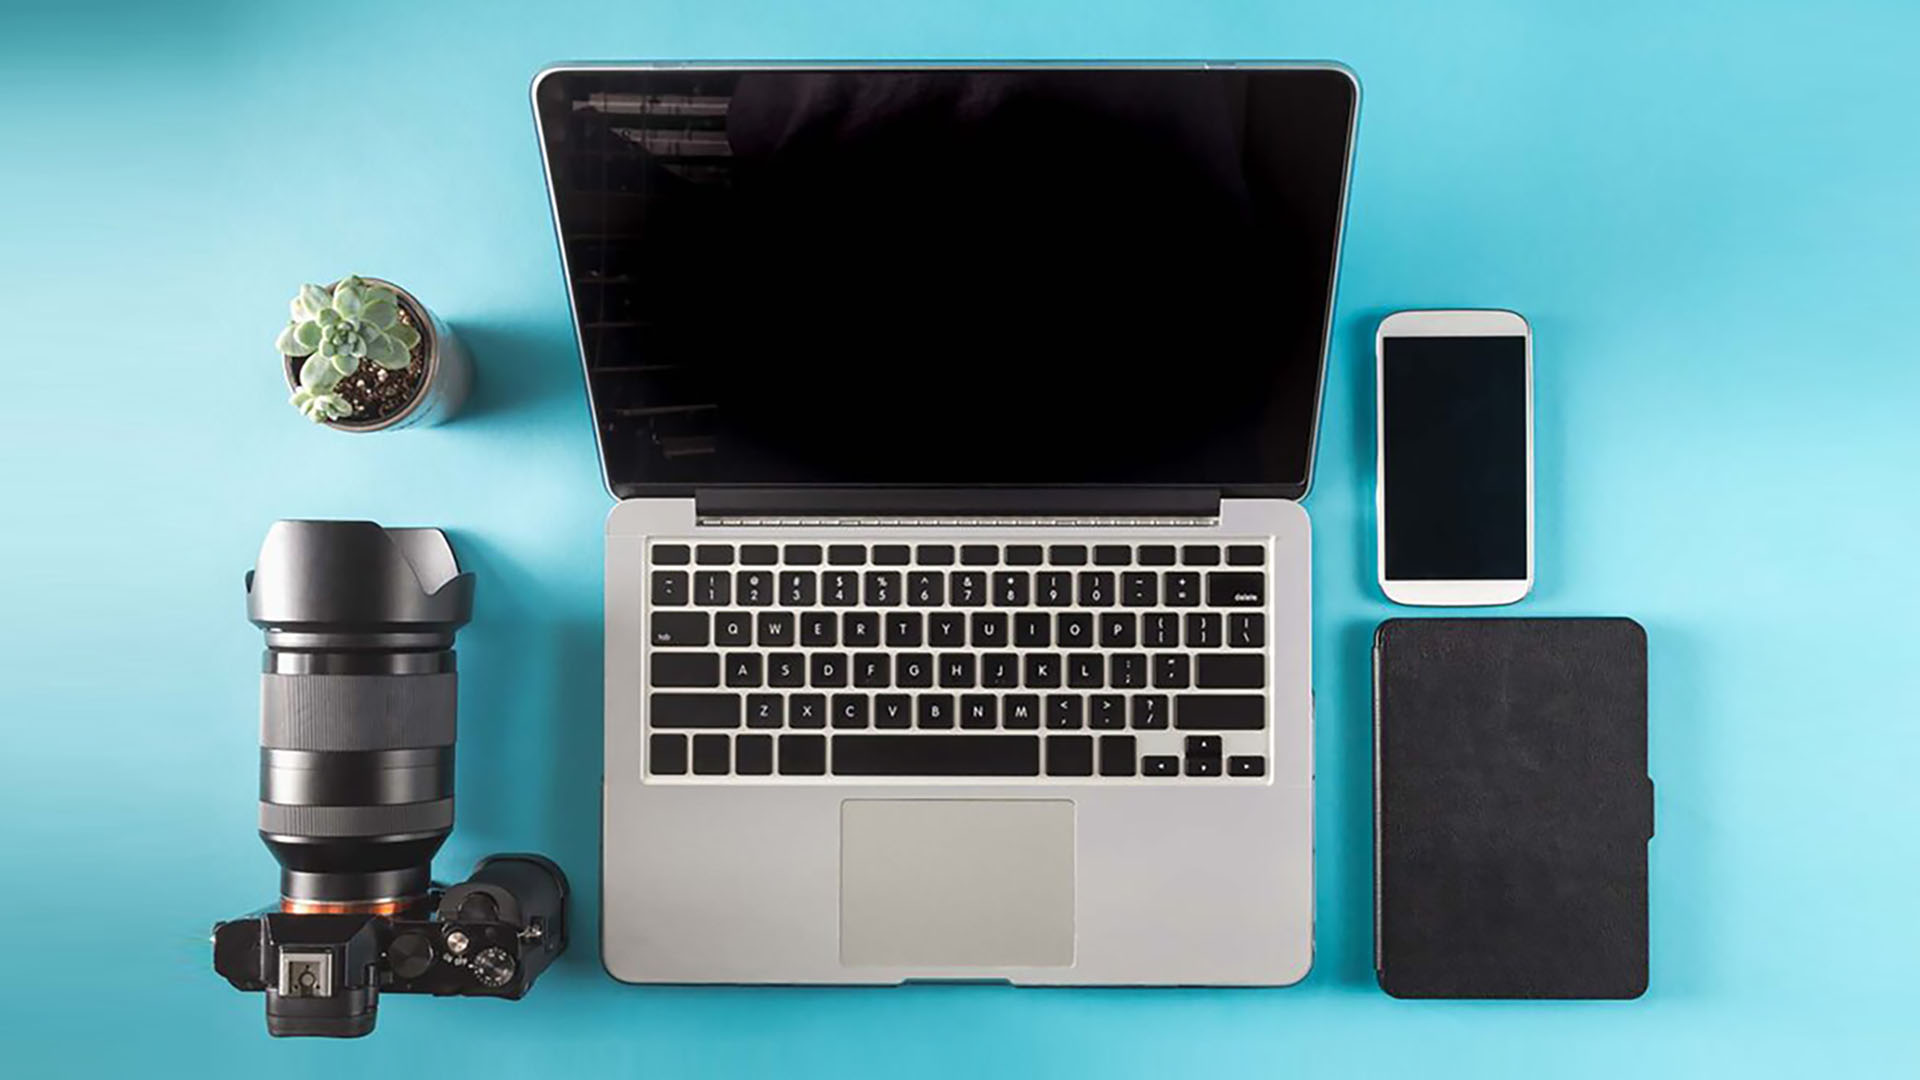 Laptop, camera, smartphone and tablet